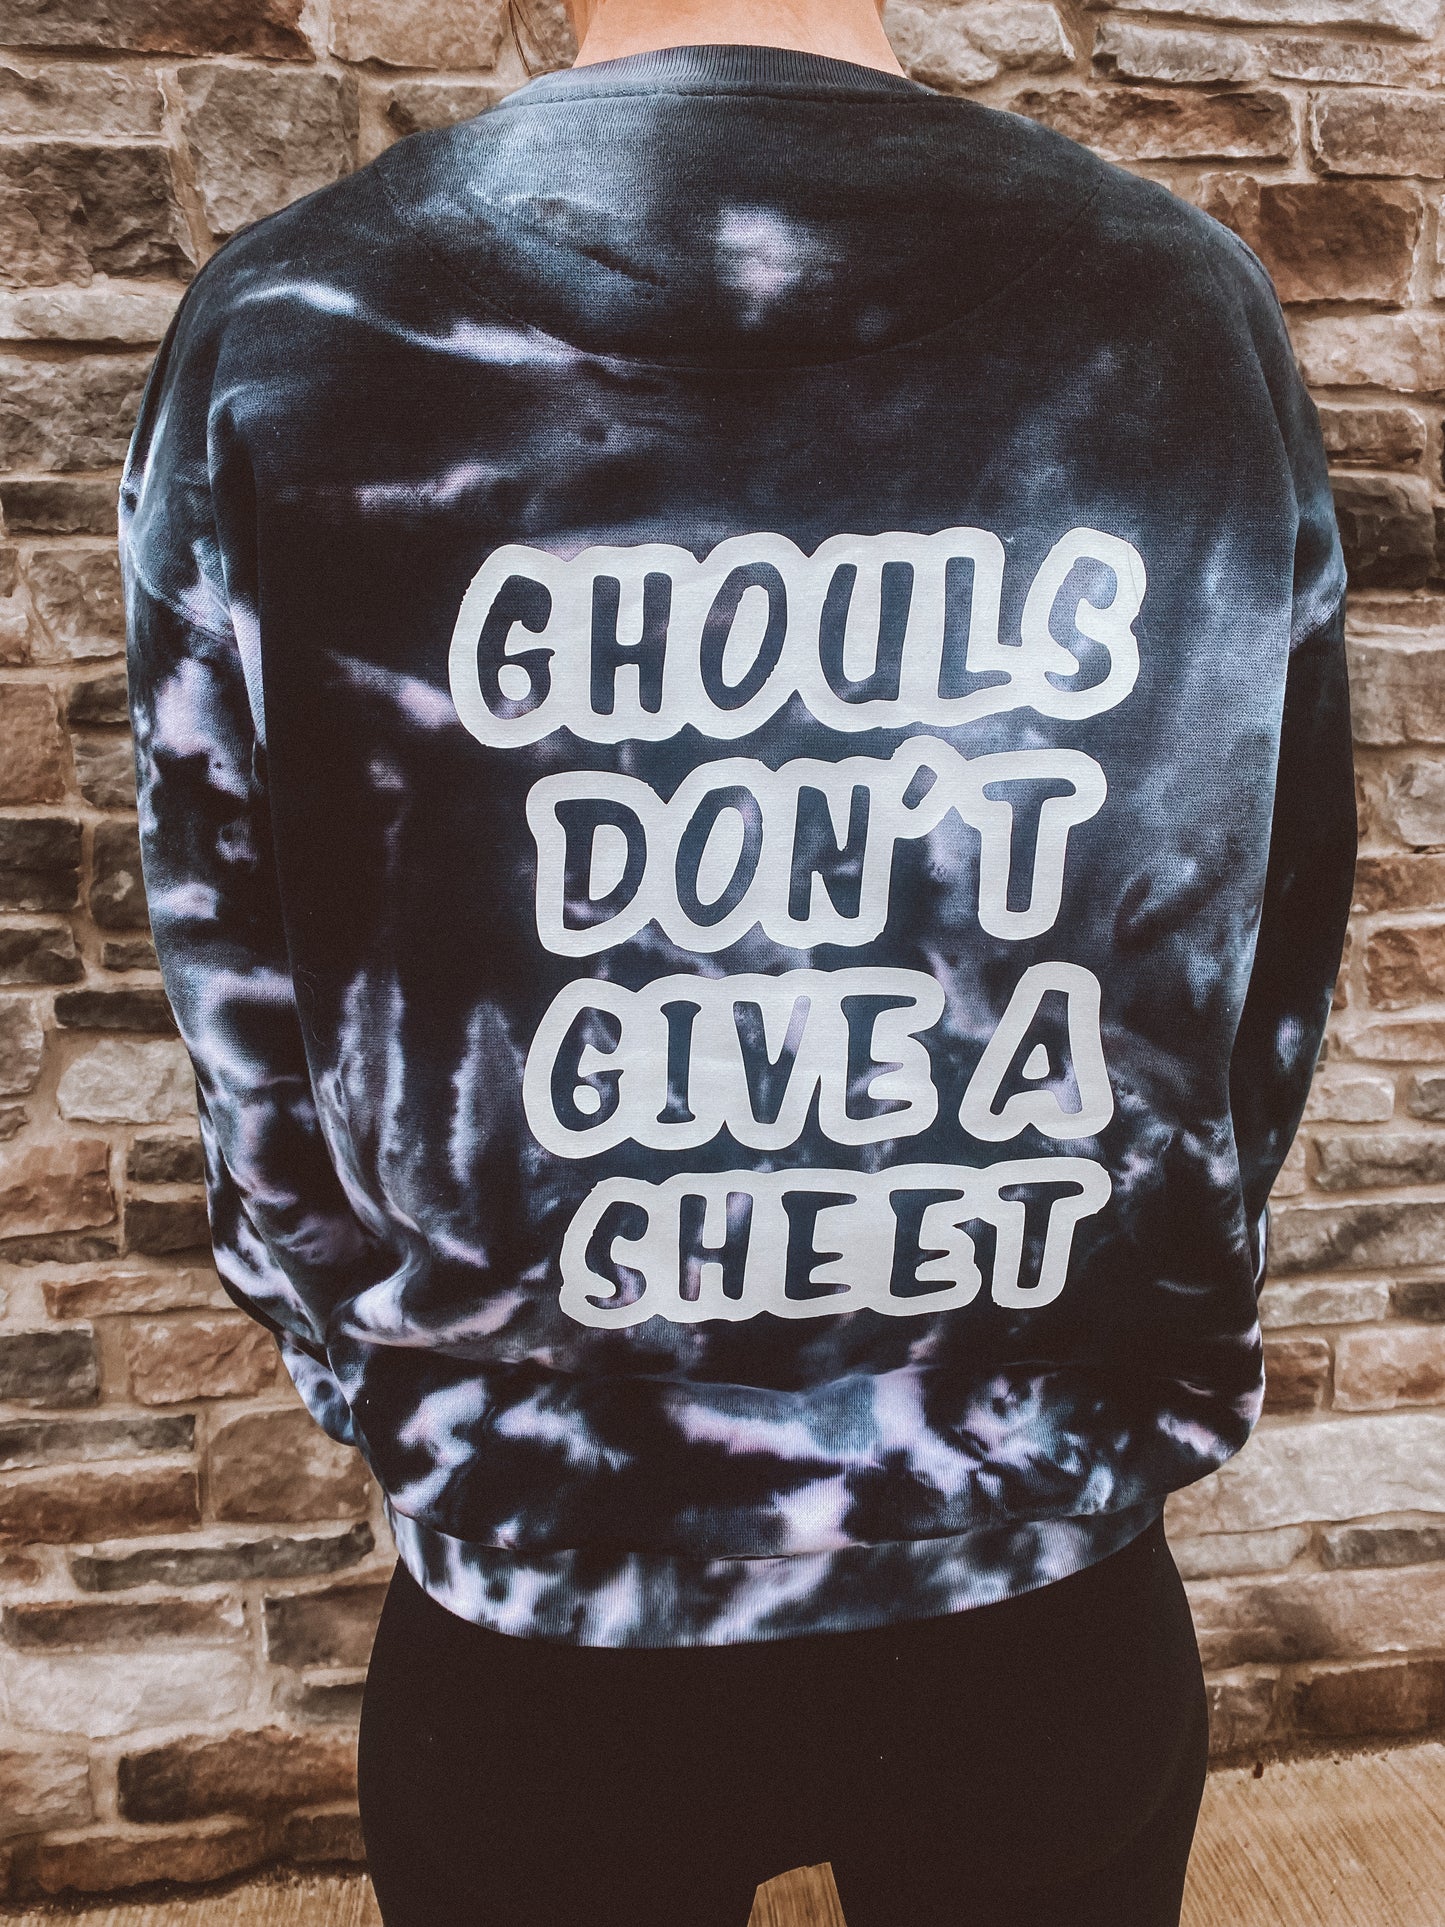 Ghouls Don’t Give a Sheet Pullover